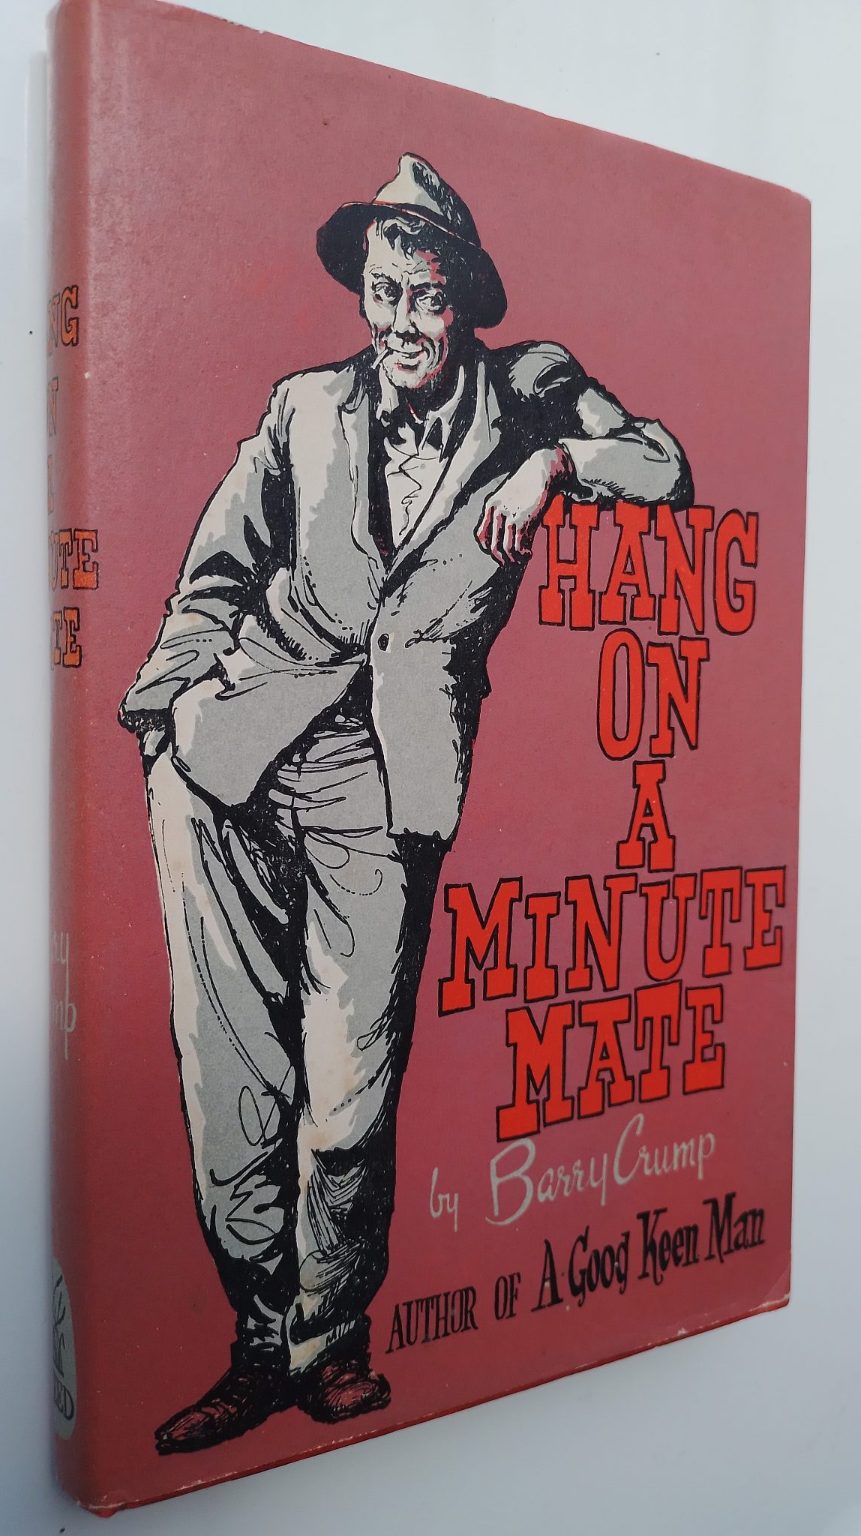 Hang On a Minute Mate - By Barry Crump - Hardback 1962